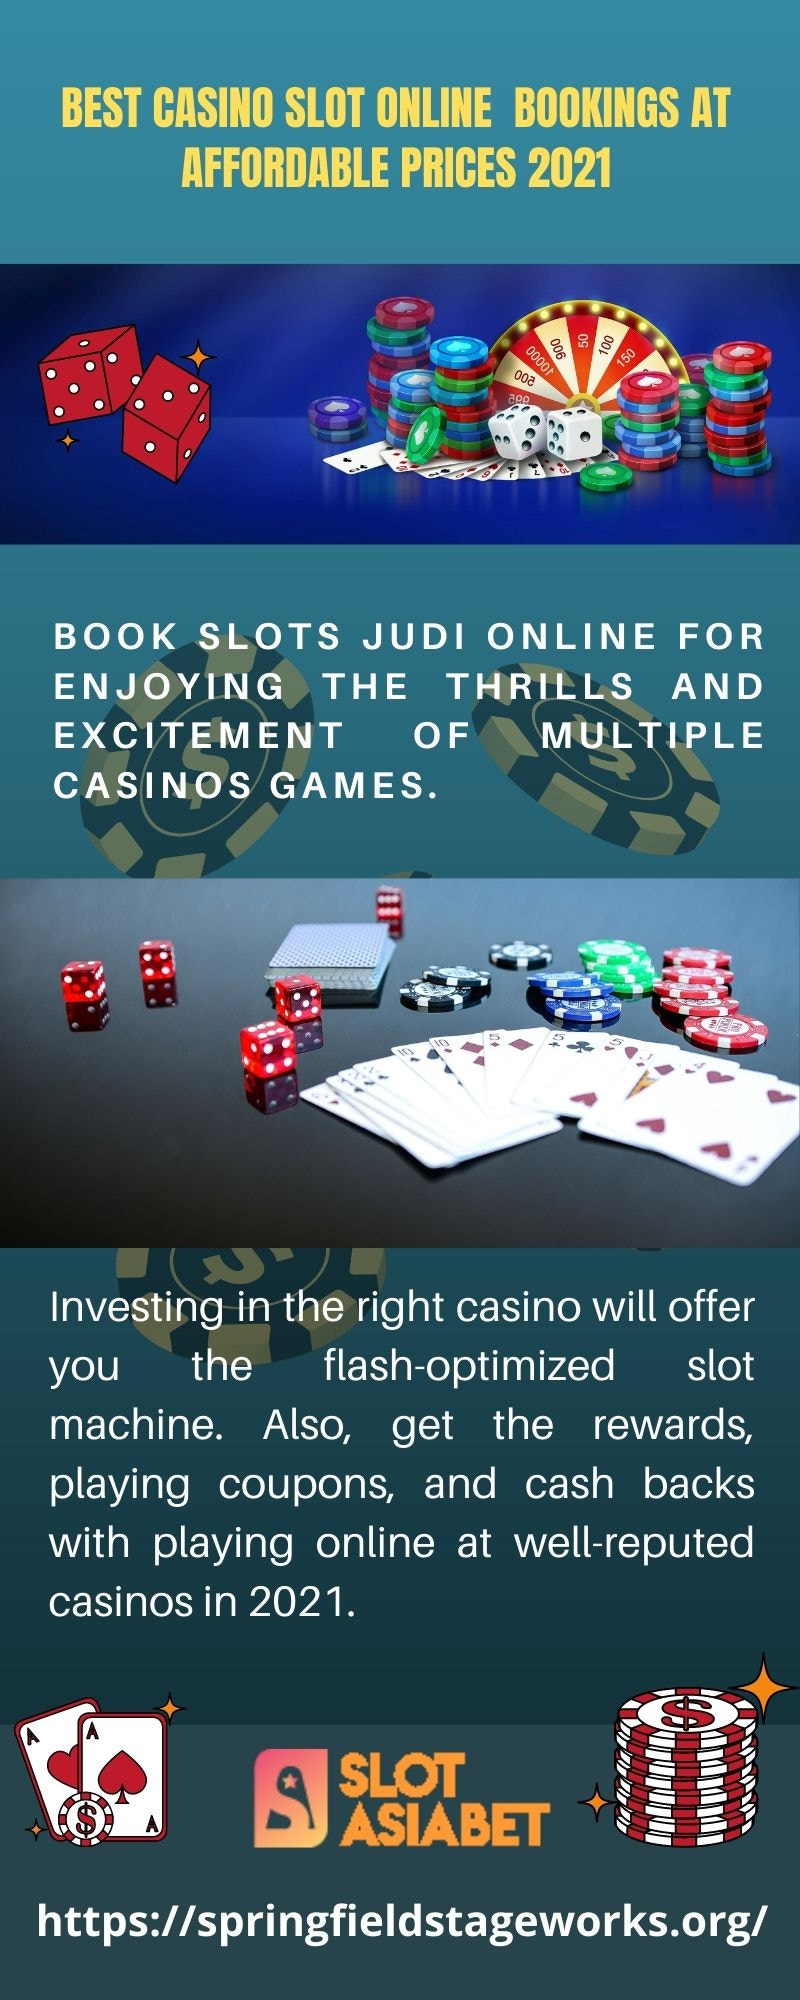 Best Casino Slot Online Bookings at Affordable Prices 2021